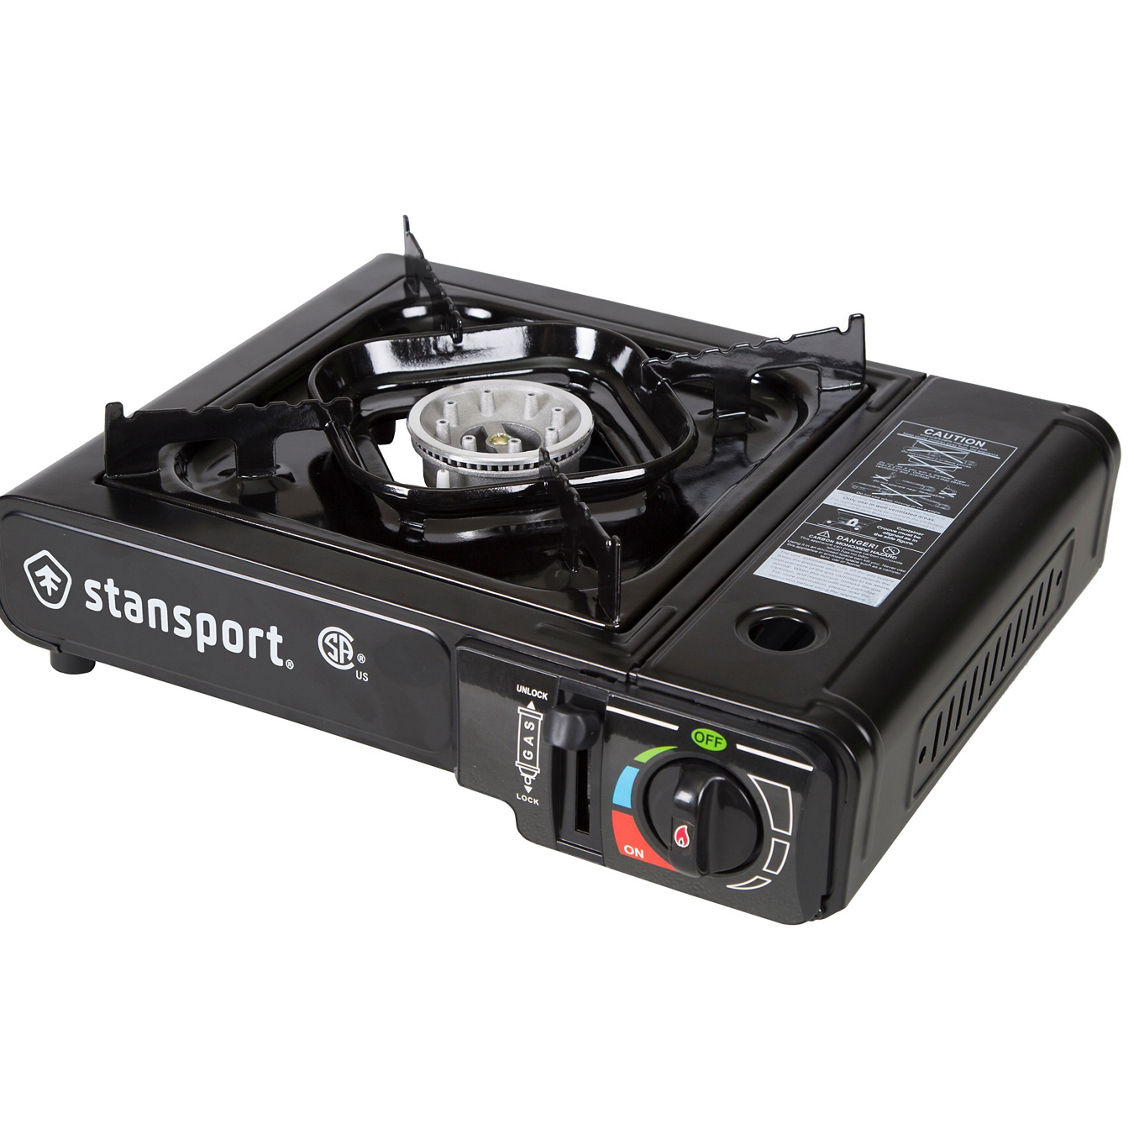 Stansport Portable Outdoor Butane Stove - Image 1 of 4